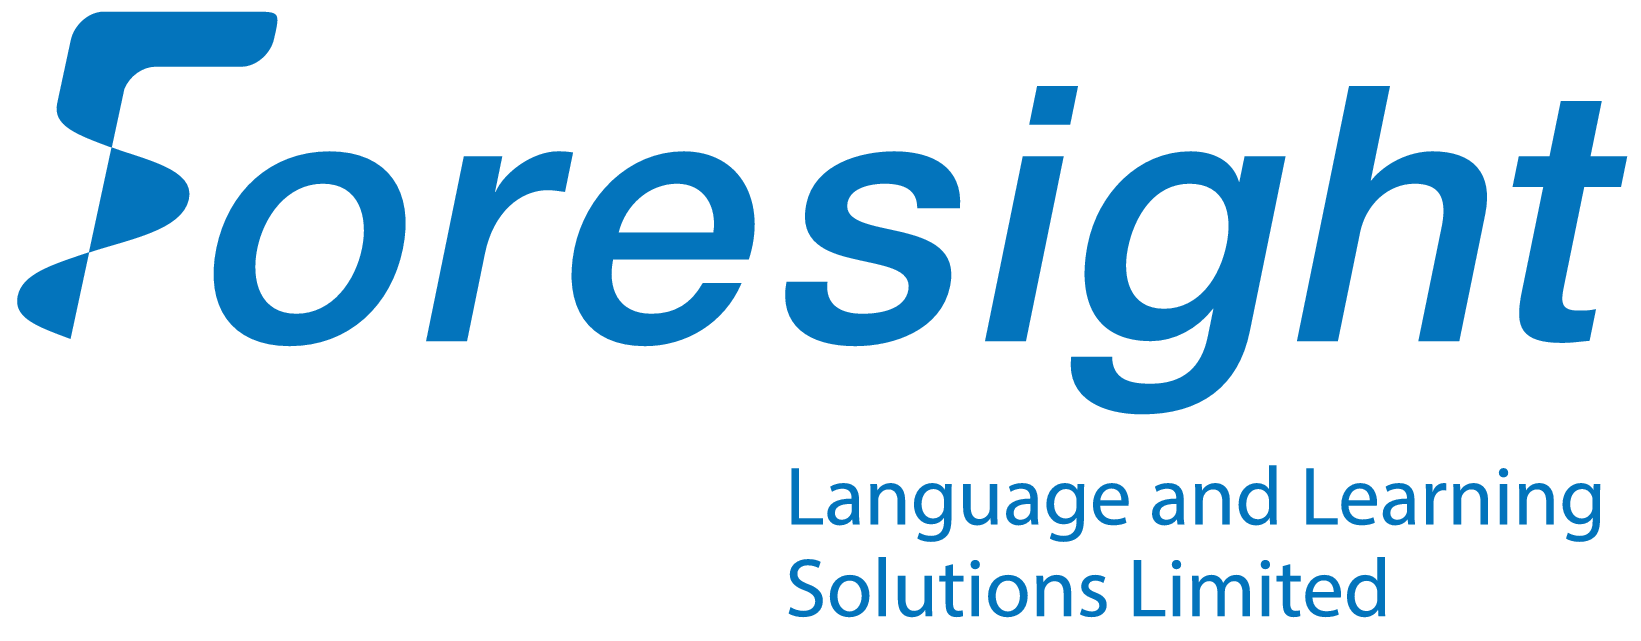 foresight language and learning solutions limited